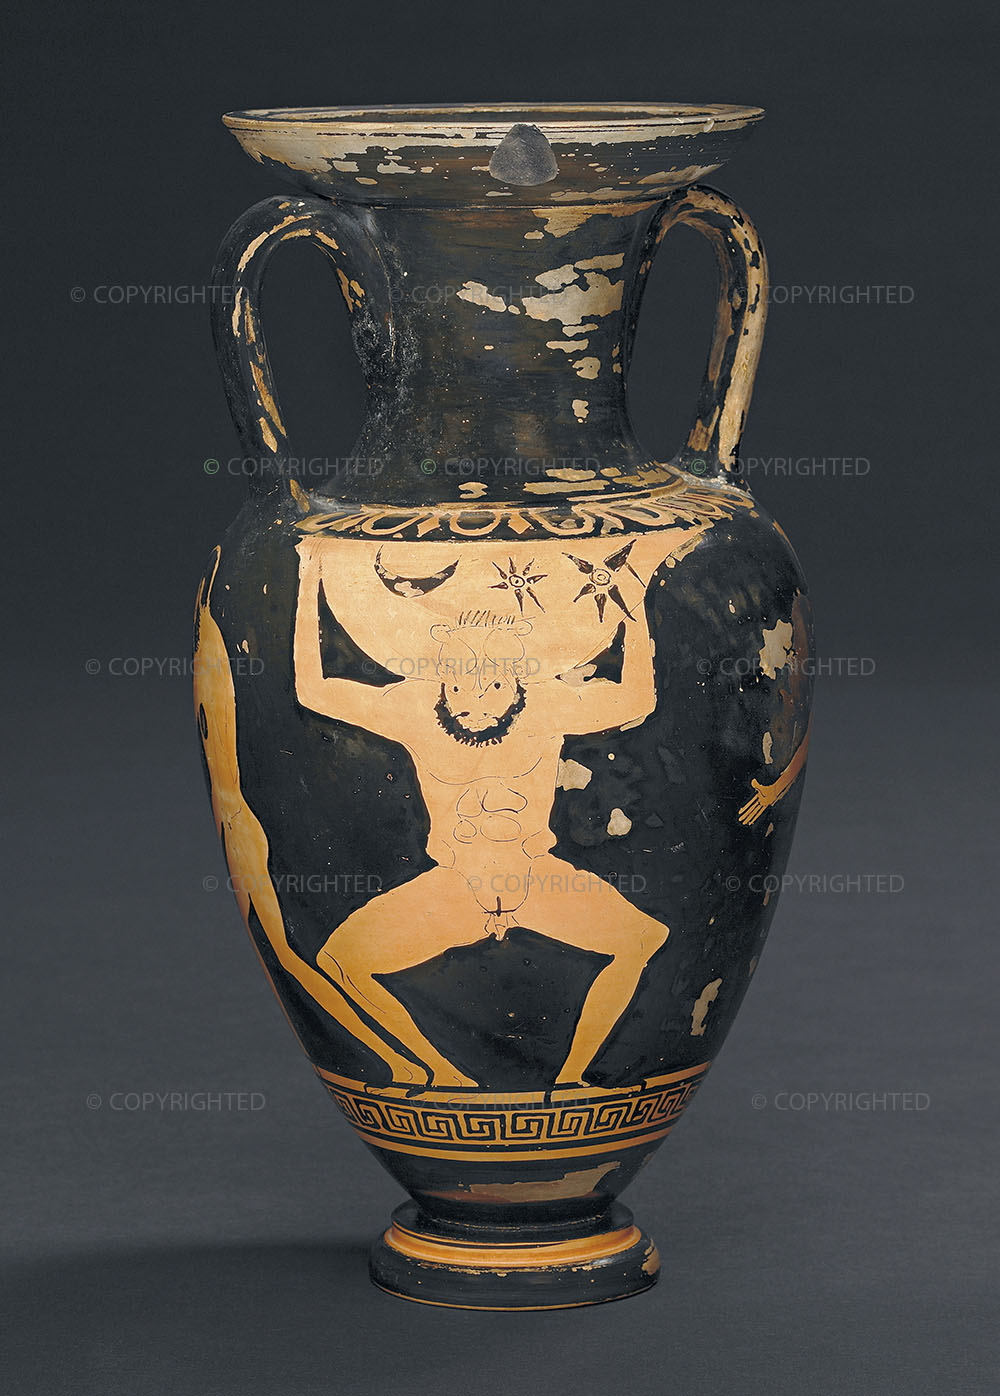 Amphora from Campania with Atlas and Heracles